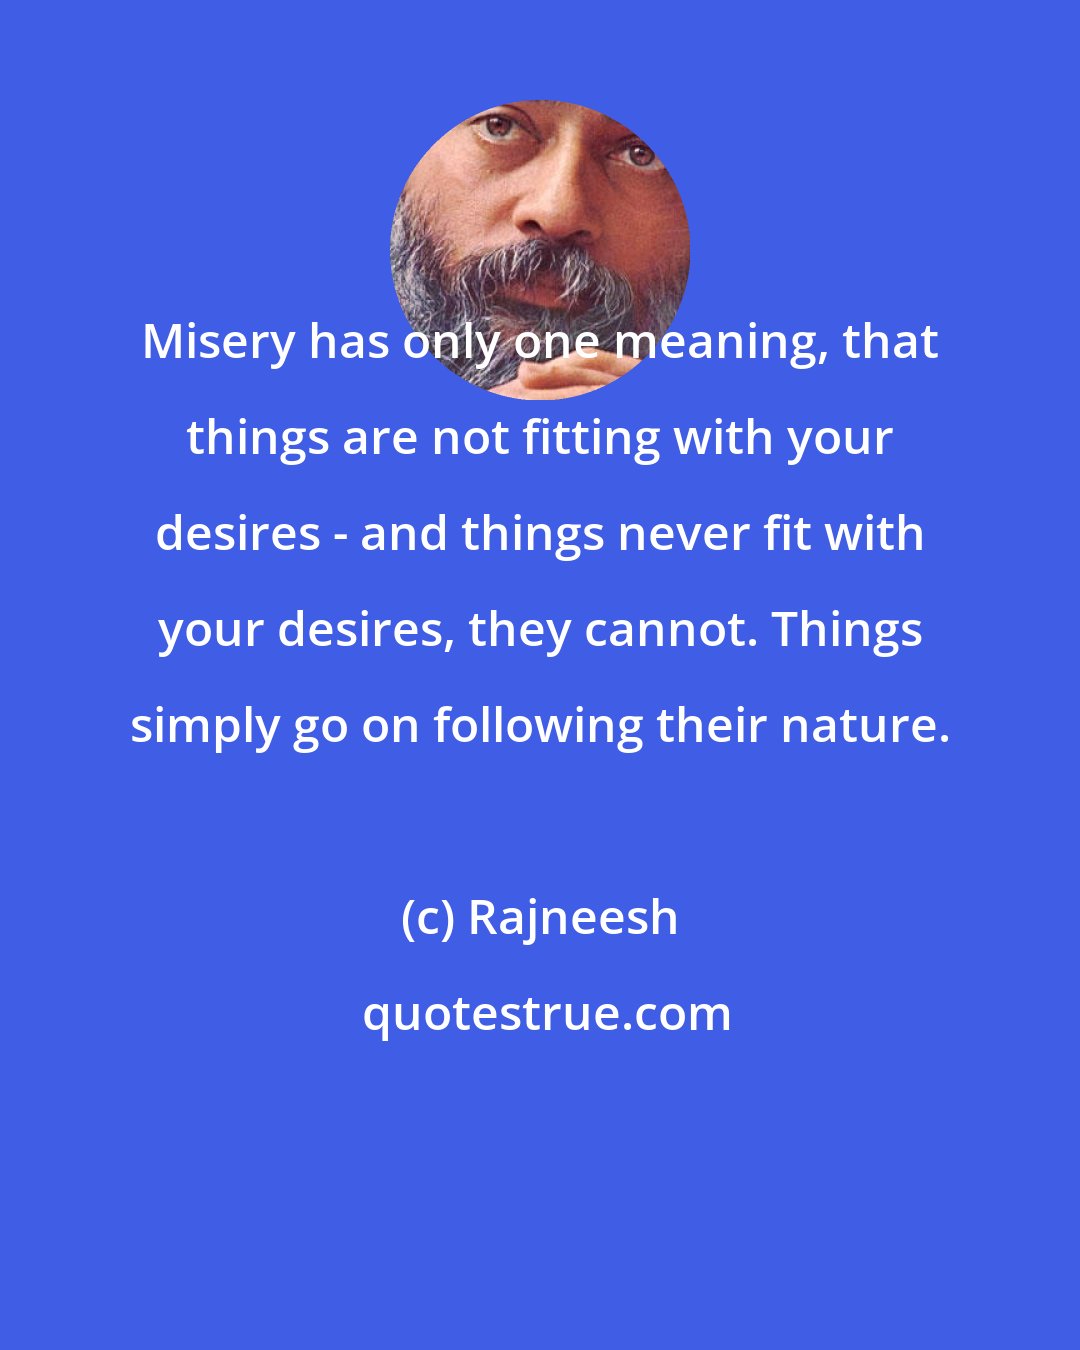 Rajneesh: Misery has only one meaning, that things are not fitting with your desires - and things never fit with your desires, they cannot. Things simply go on following their nature.